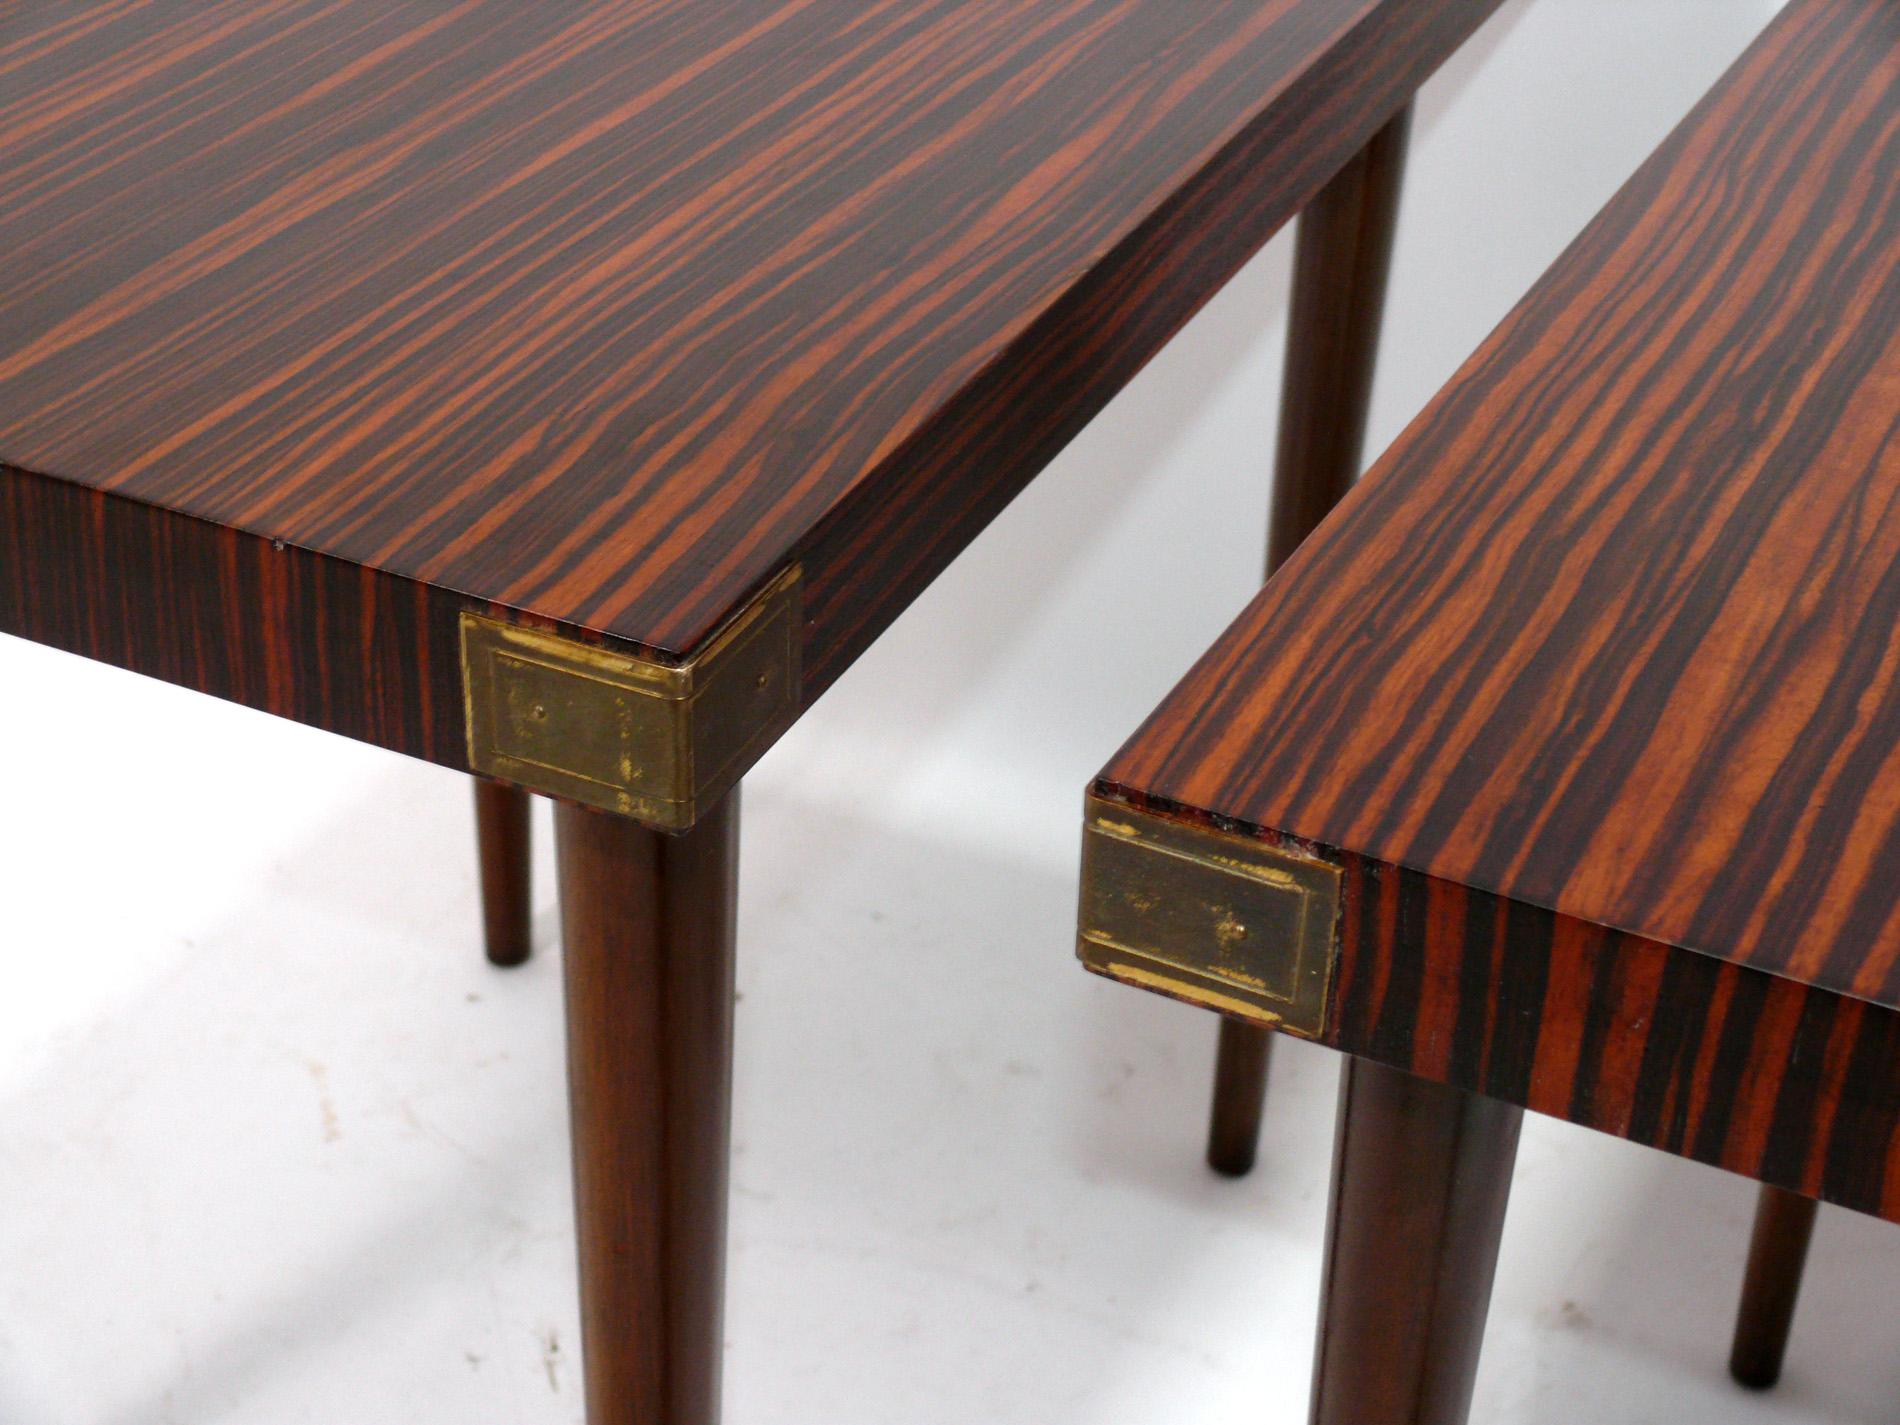 Elegant Pair of Rosewood End Tables, designed by Tommi Parzinger for Charak Modern, American, circa 1950s. They are a versatile size and can be used as end or side tables, or as night stands. 